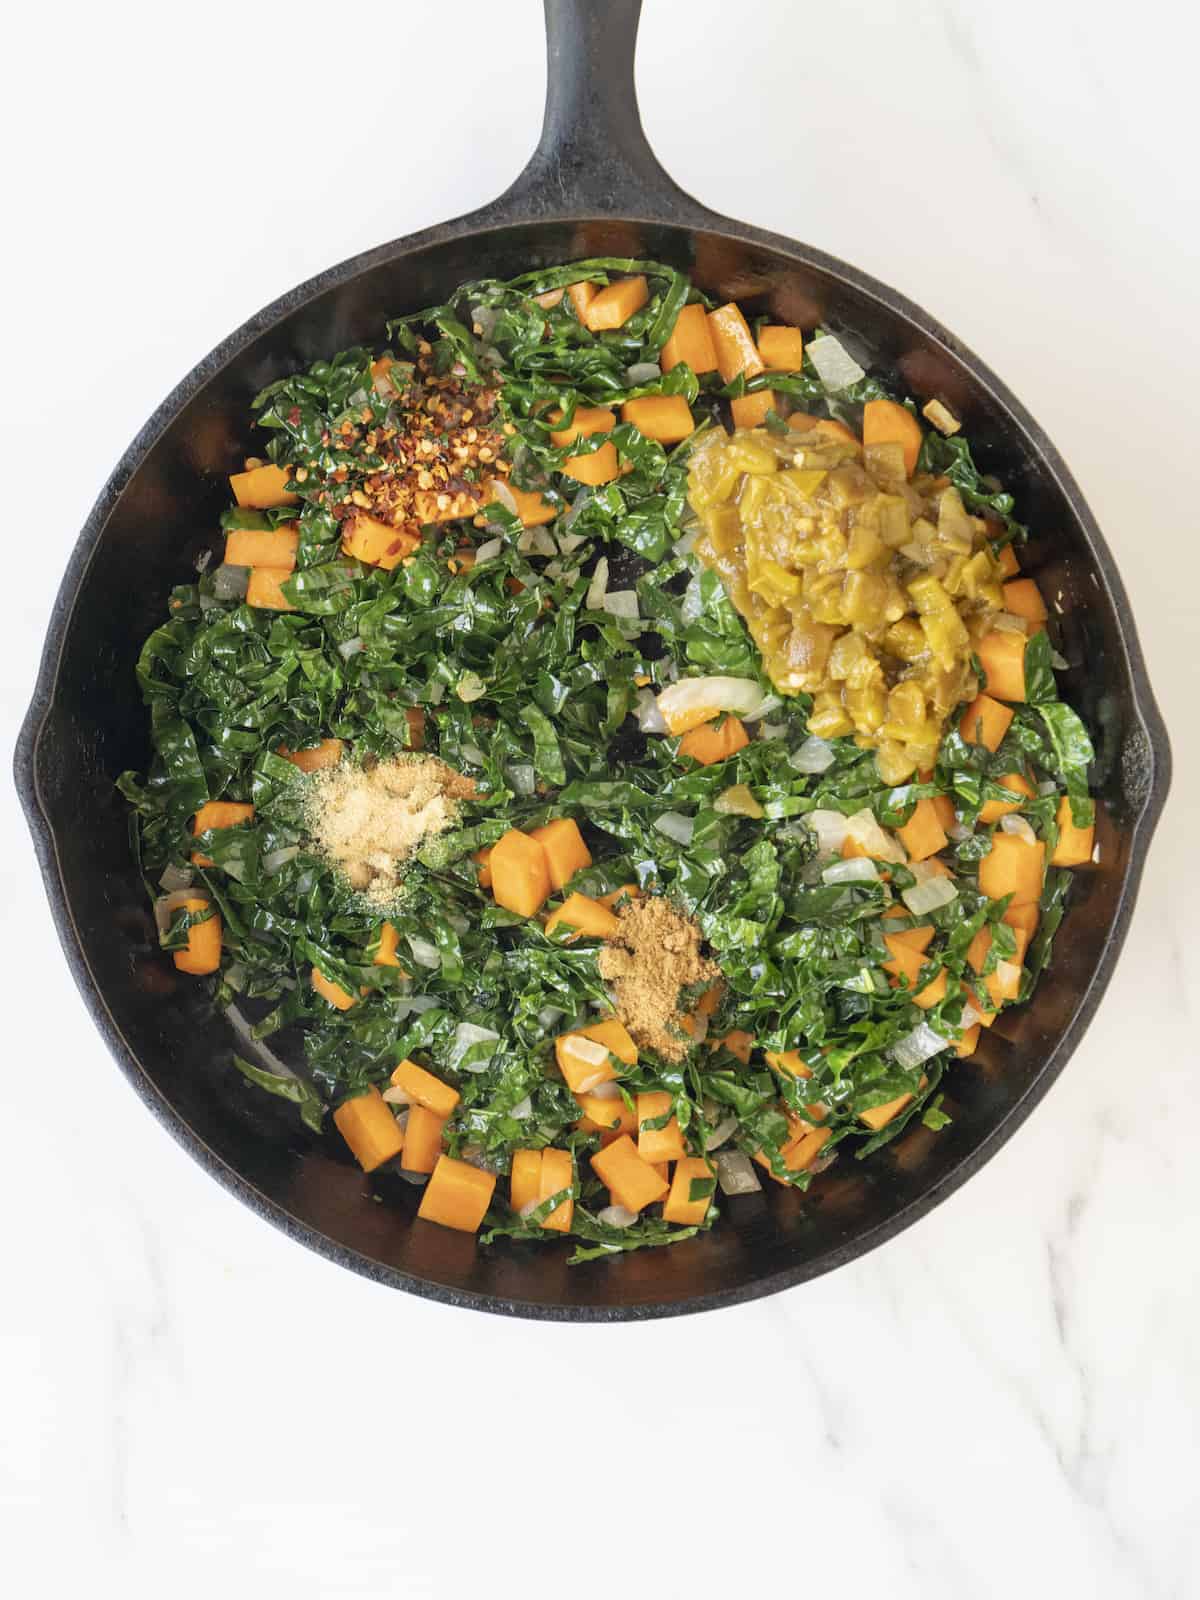 A skillet with cooked vegetables (kale, onions, sweet potatoes) topped with spices and diced green chiles.